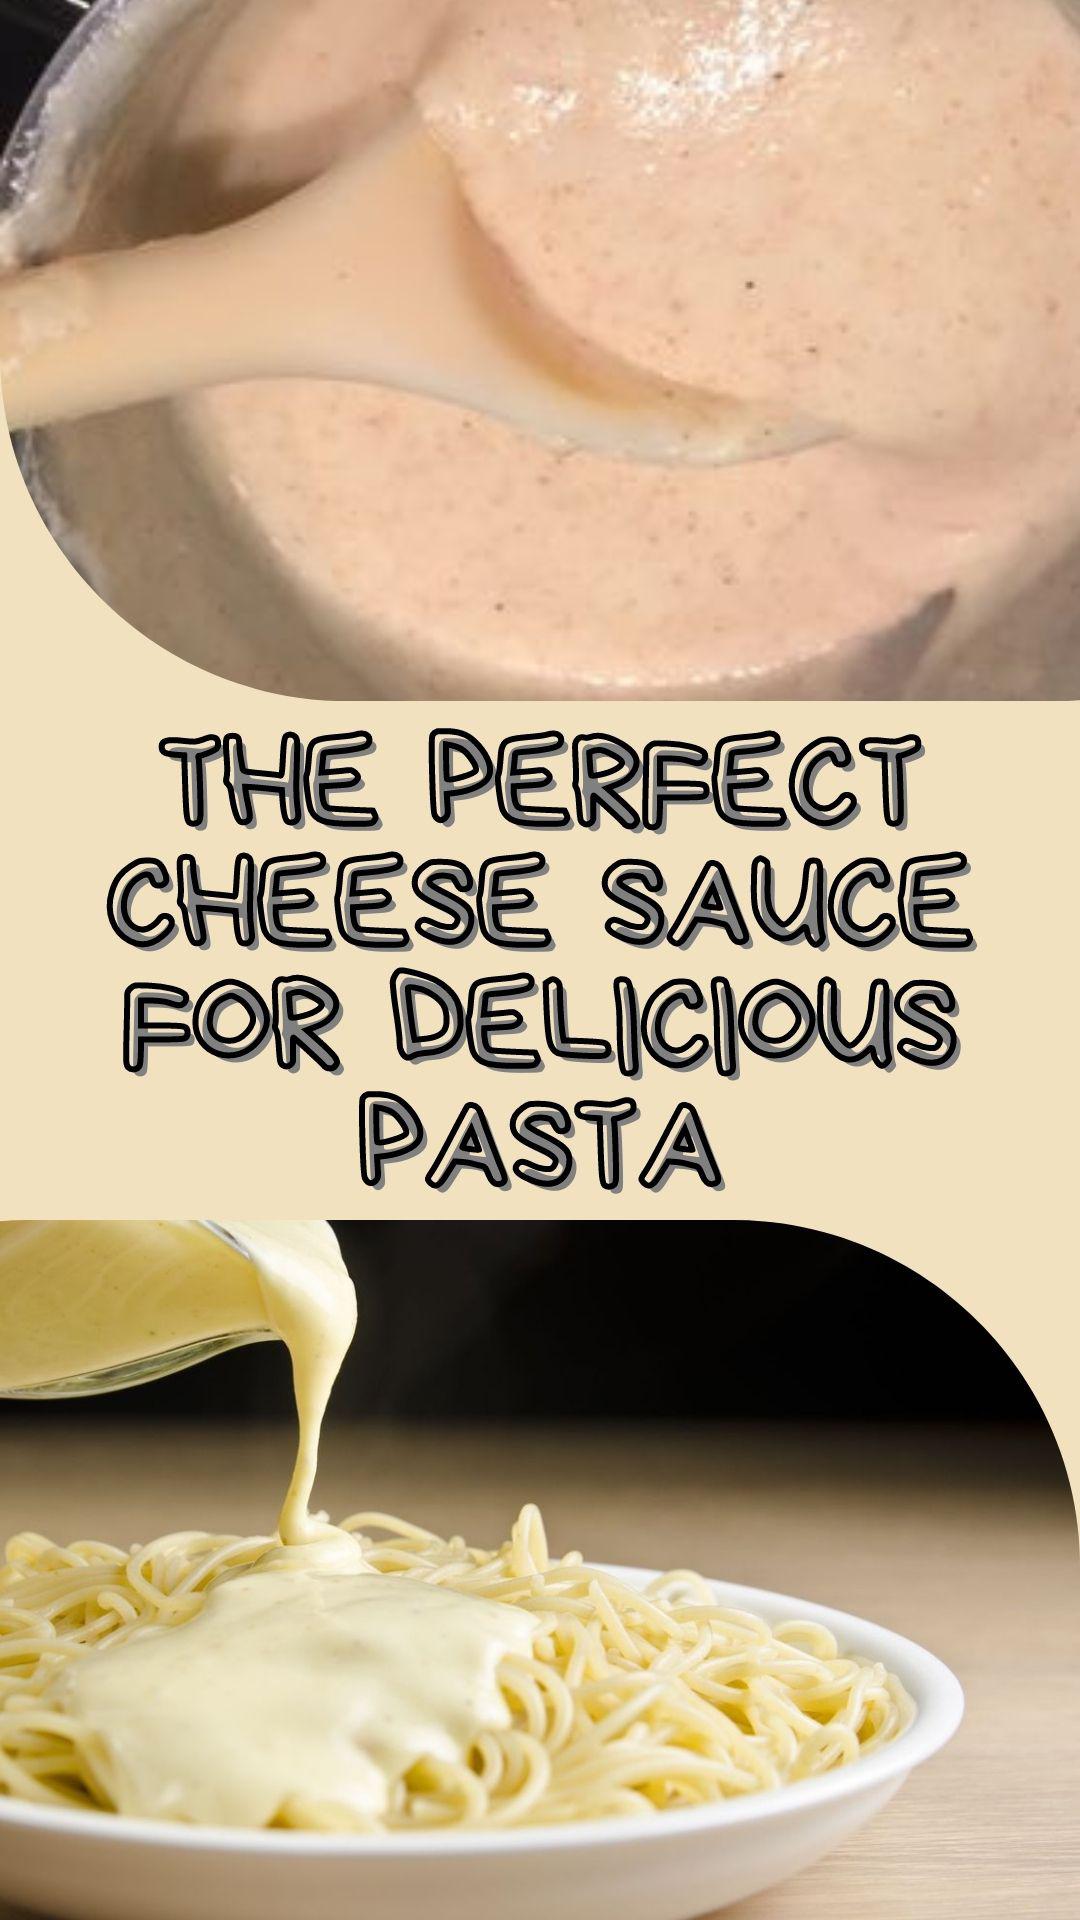 The perfect cheese sauce for delicious pasta